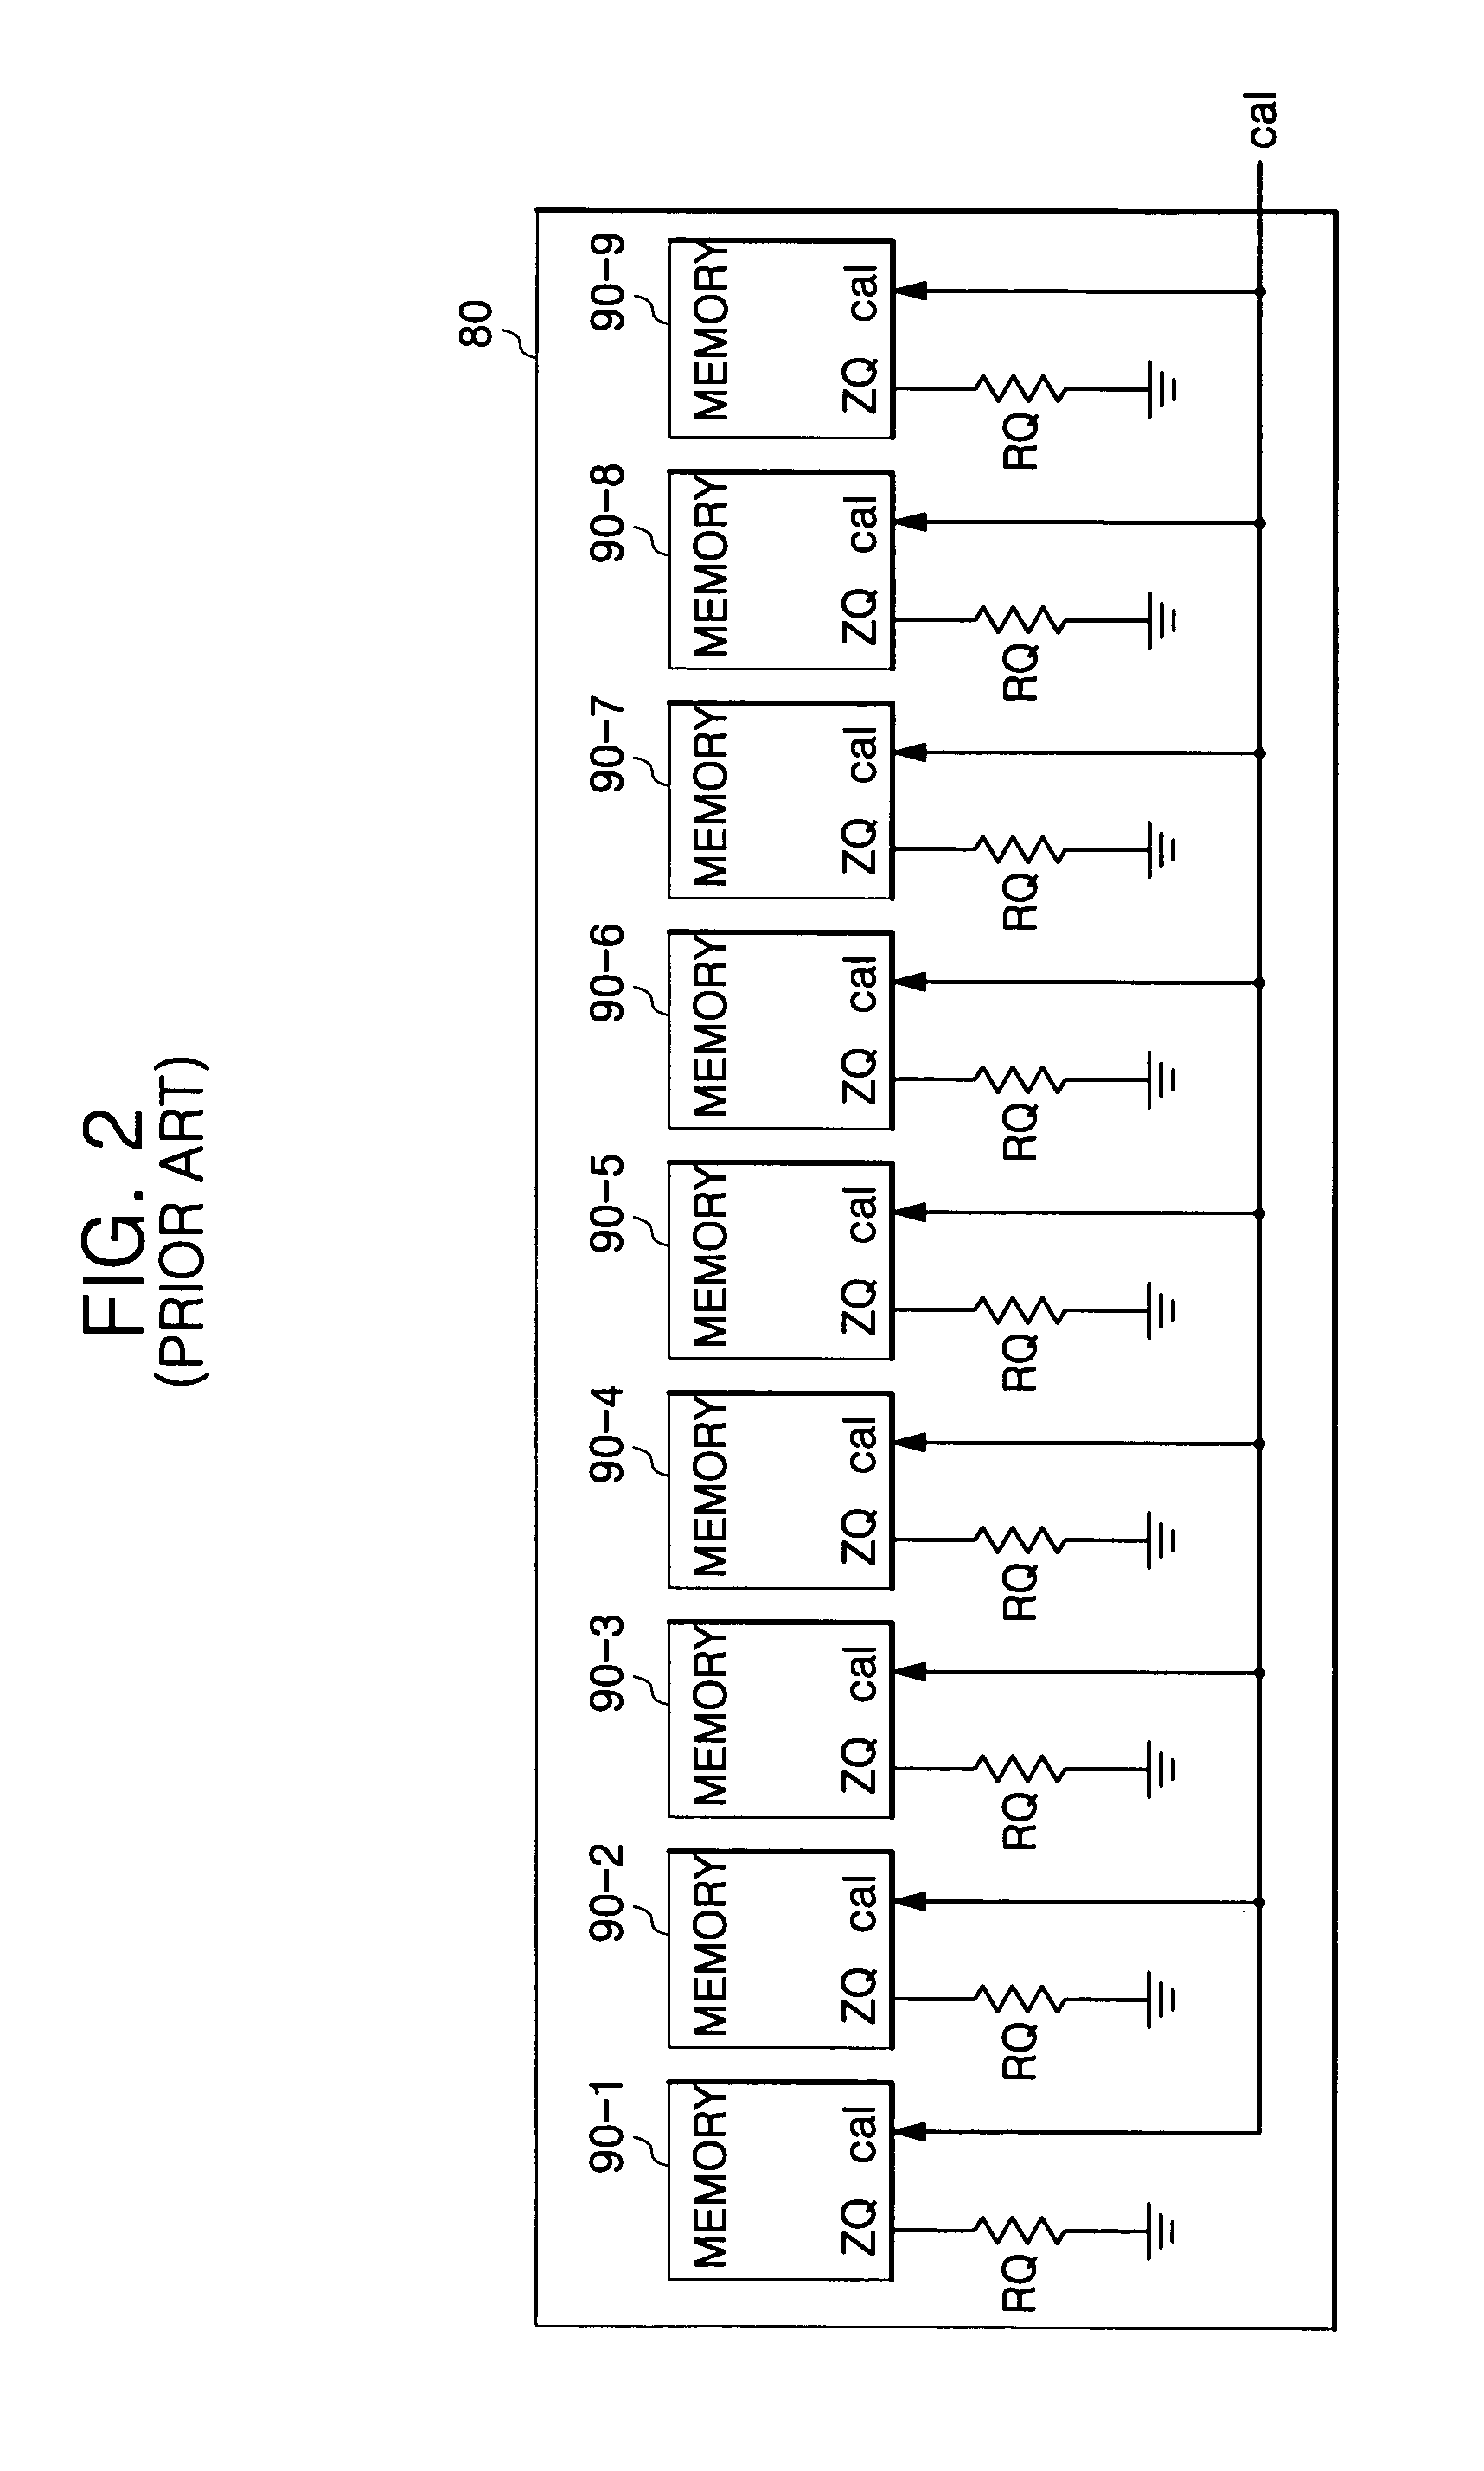 Memory module and impedance calibration method of semiconductor memory device